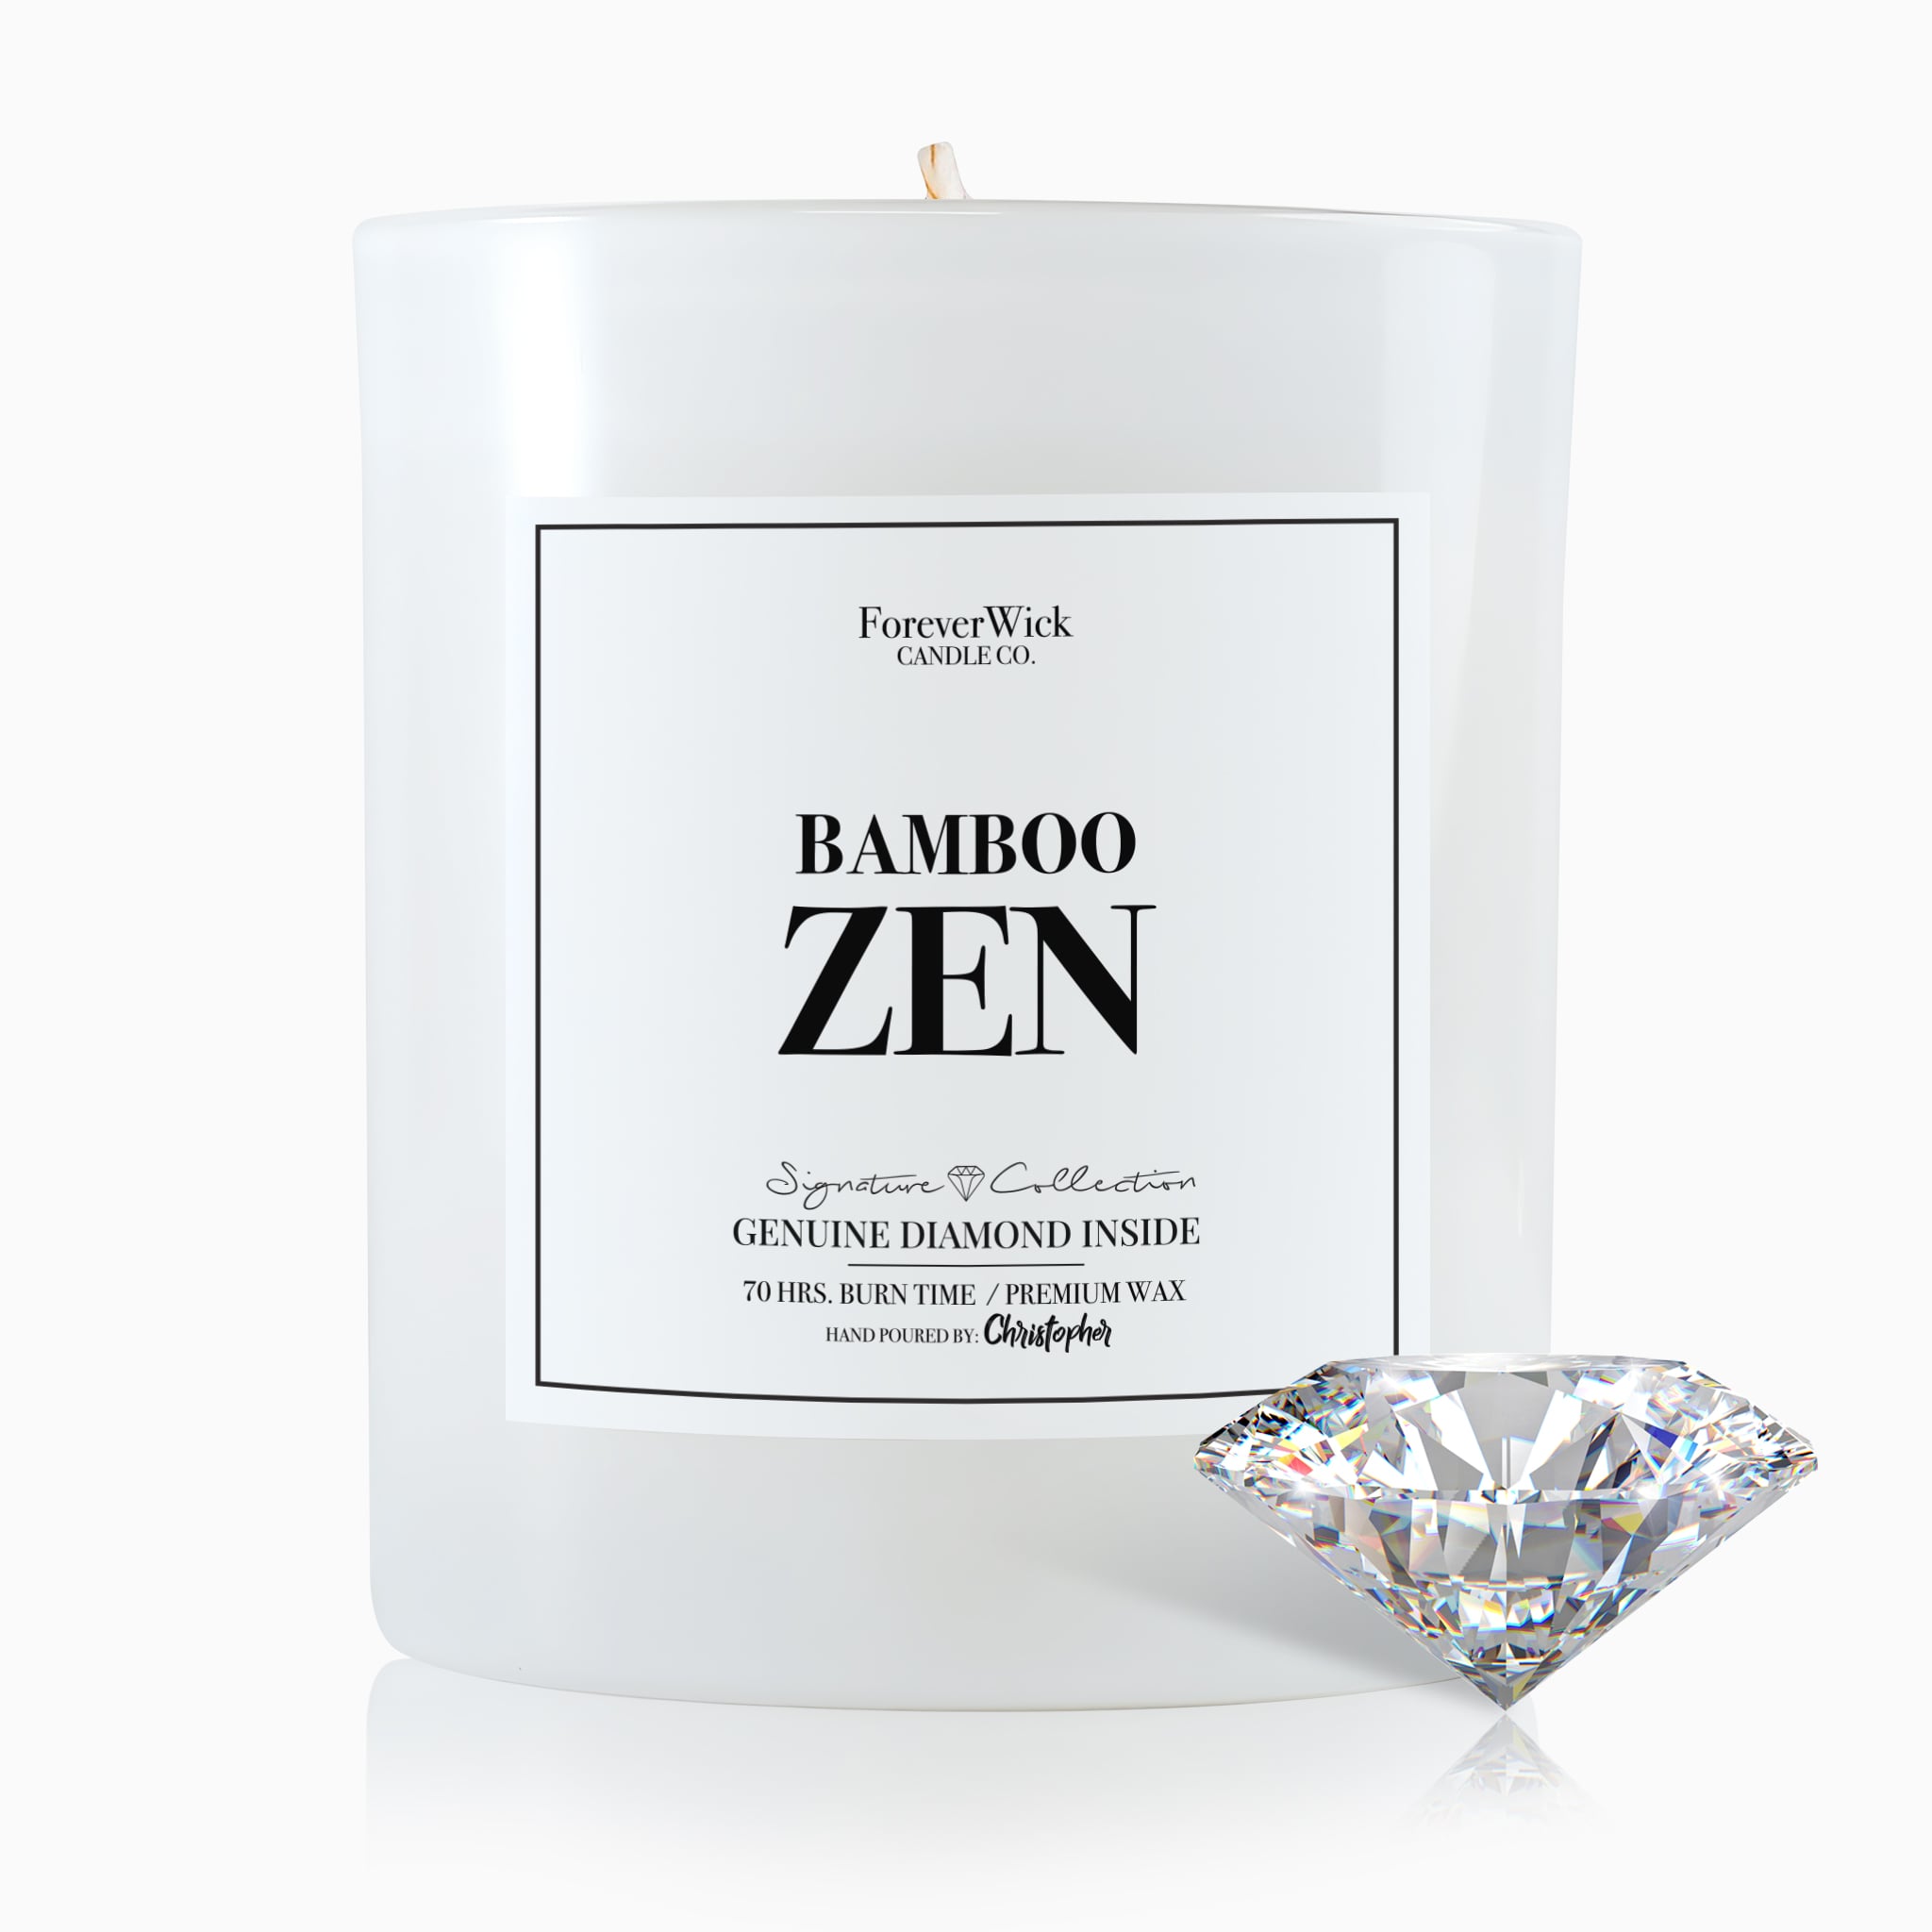 Wood Wick Candle - Strawberry Dream – Modern Zen Candle Company